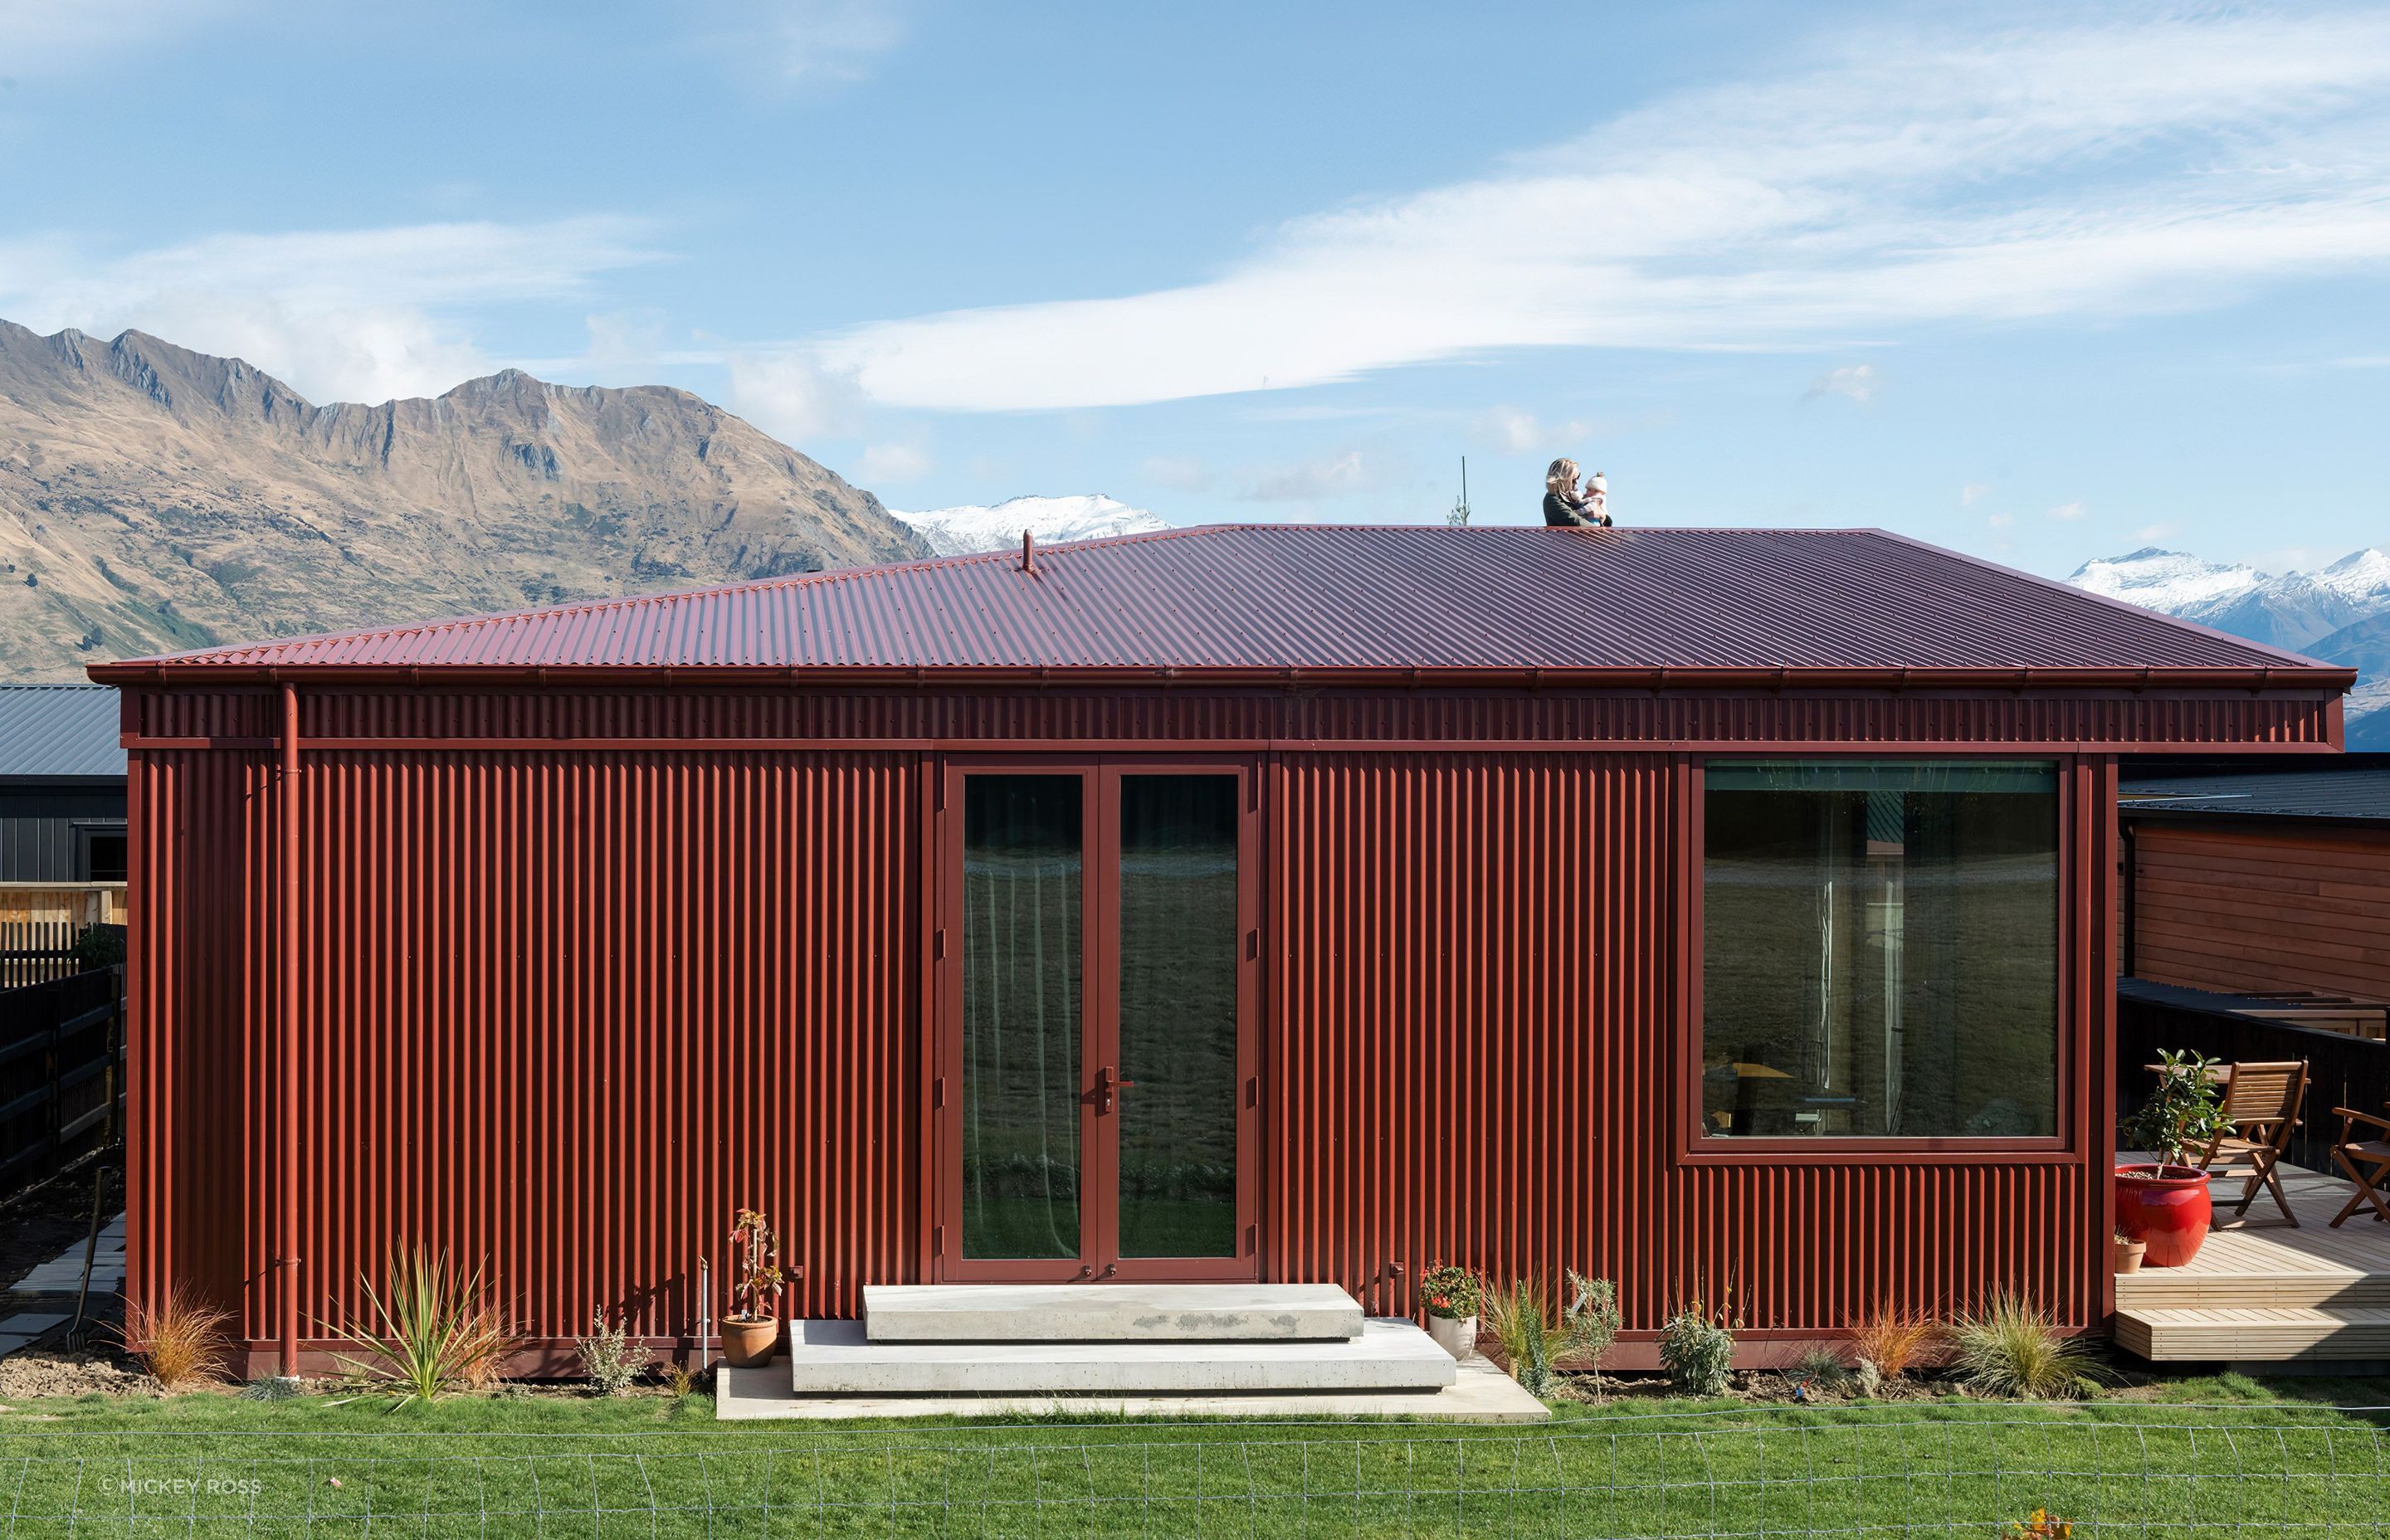 The new-build family home in Wanaka designed by Rafe Maclean of Rafe Maclean Architects. “For budget reasons we made the construction very simple,” he says. “The homeowners wanted something interesting that was really well-crafted.”